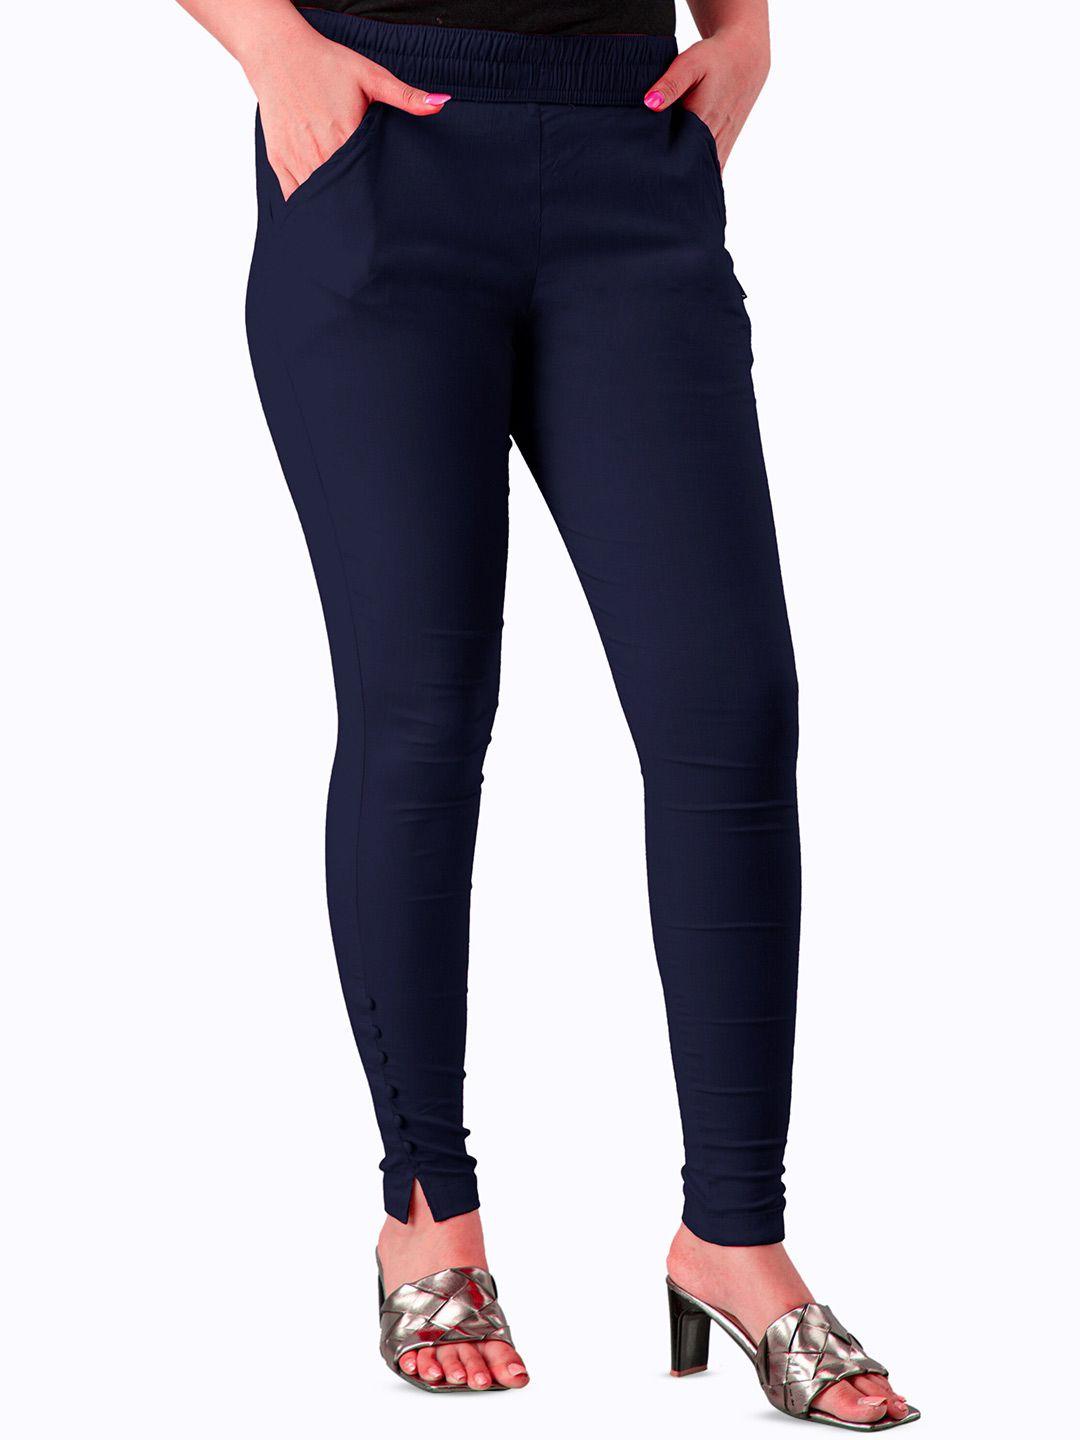 baesd stretchable slim fit jeggings